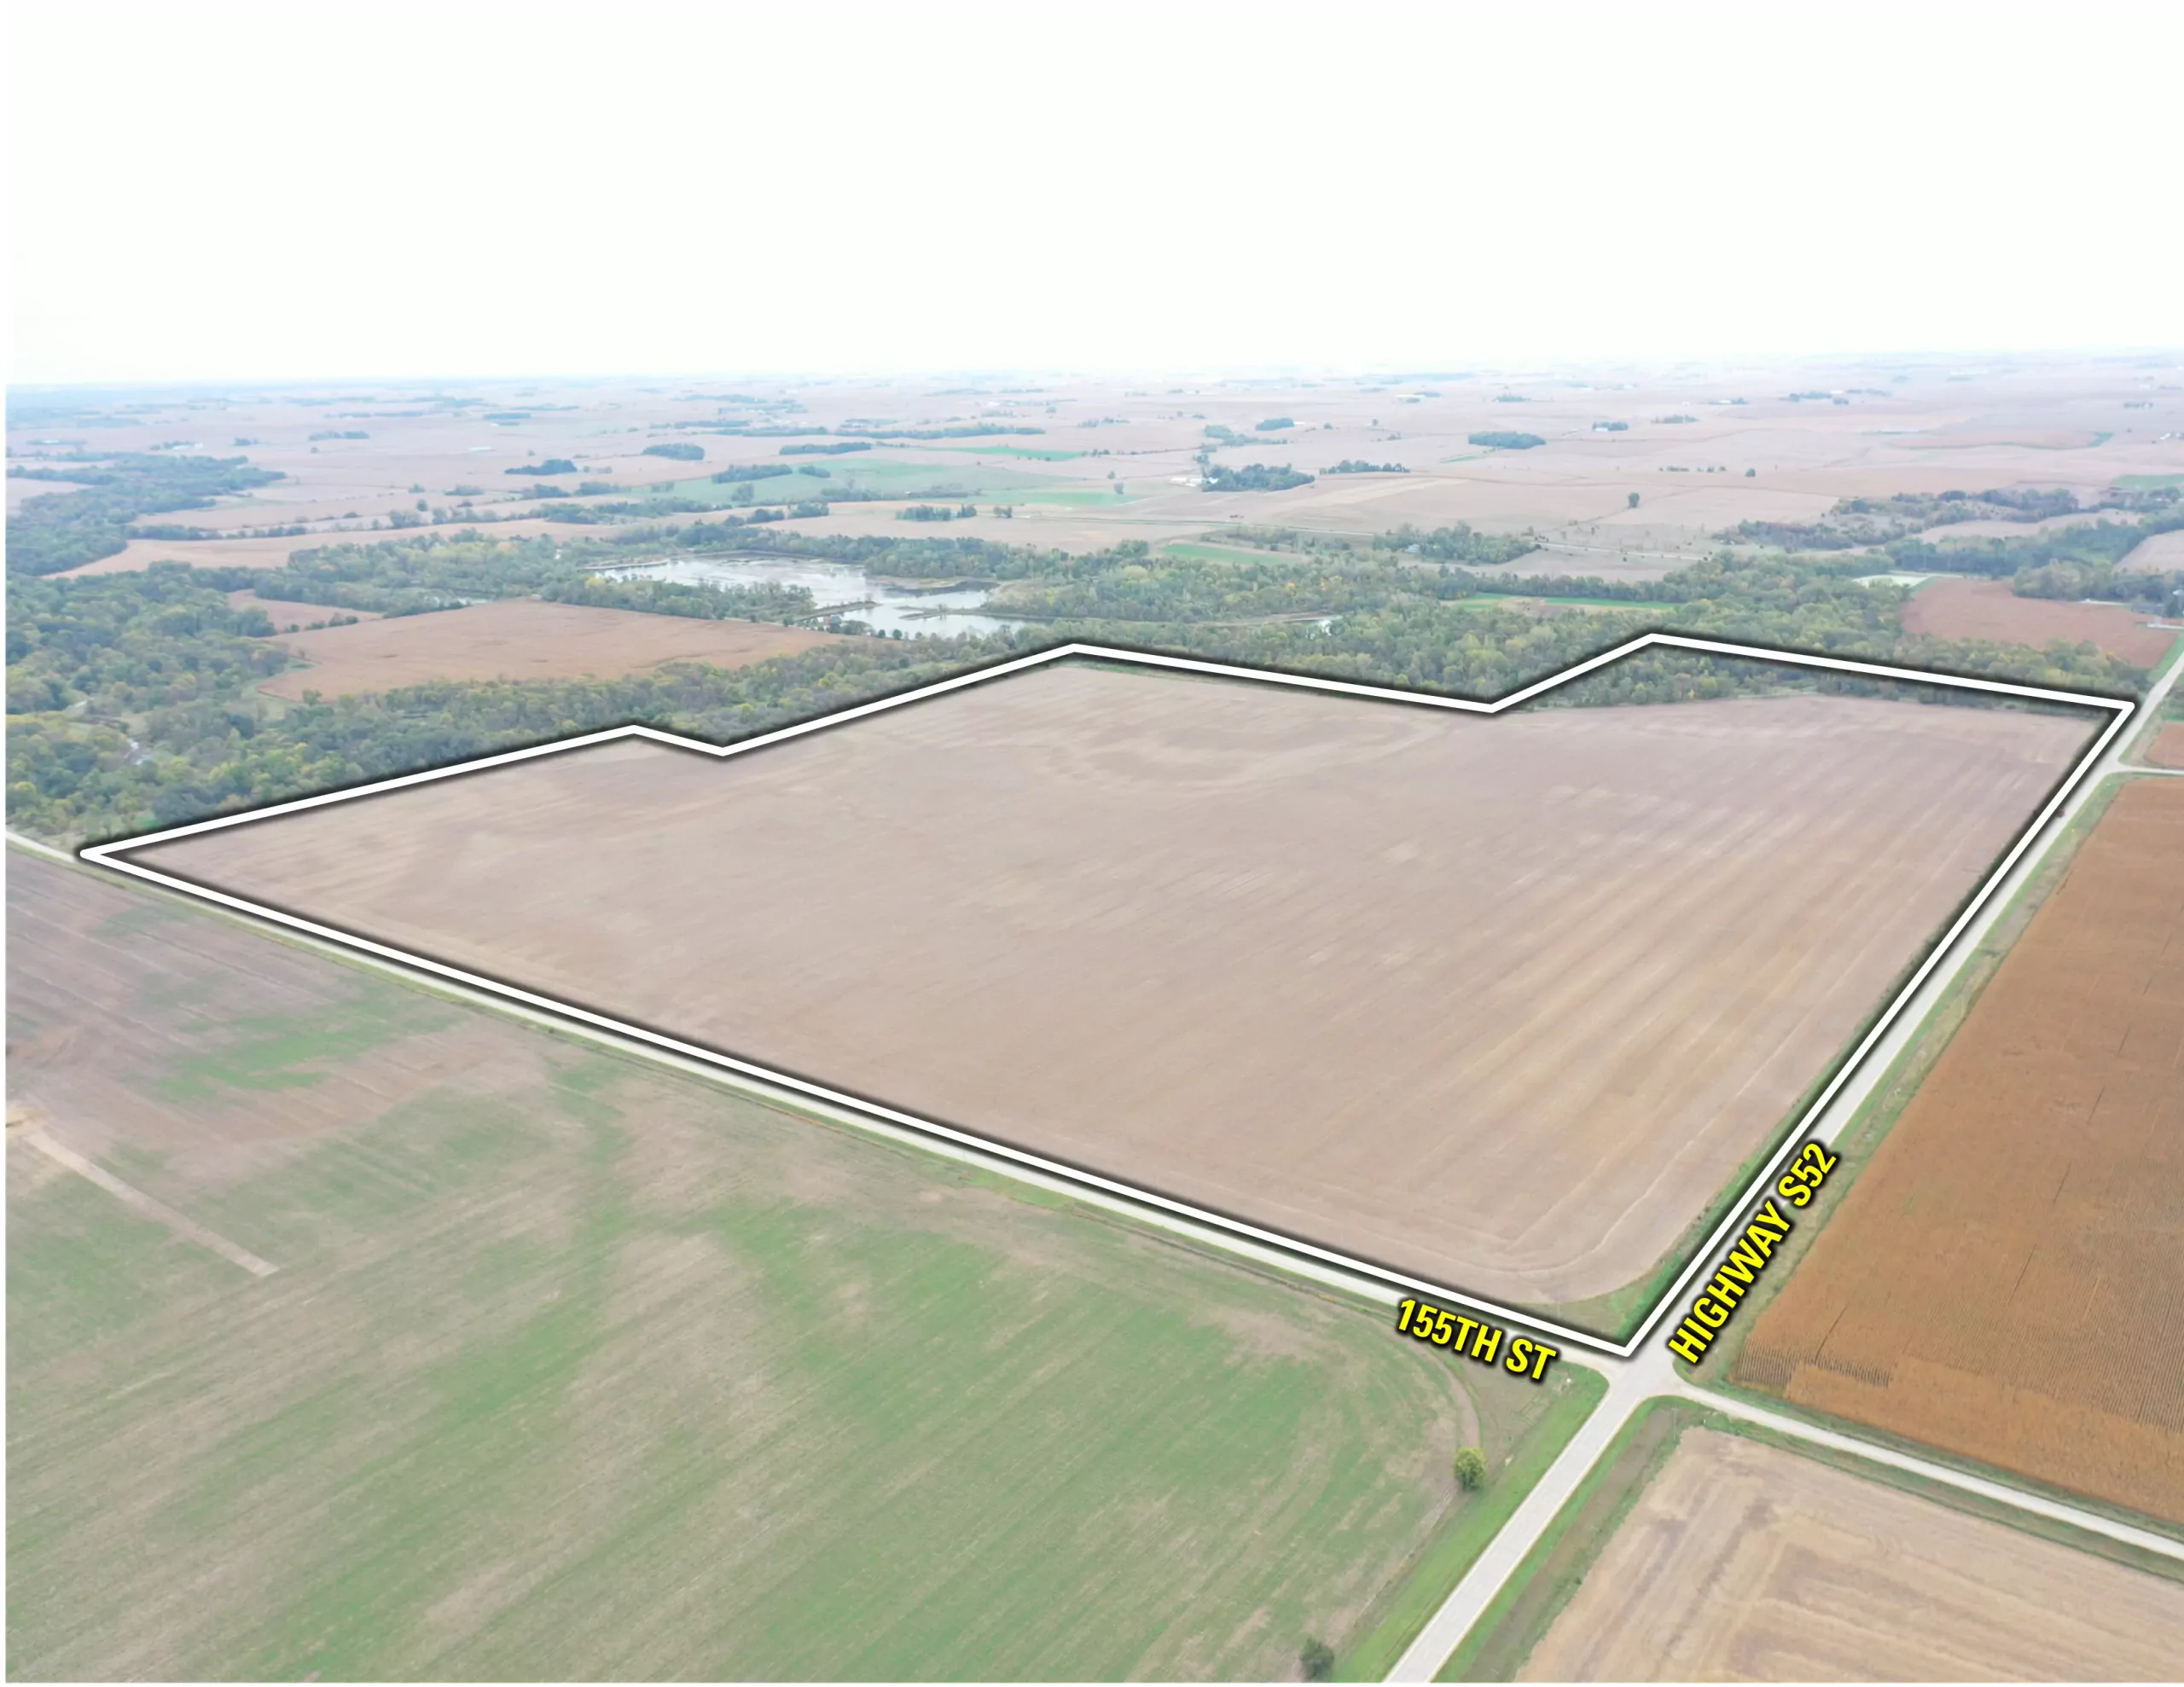 auctions-land-marshall-county-iowa-189-acres-listing-number-15802-Edit 2-1.webp